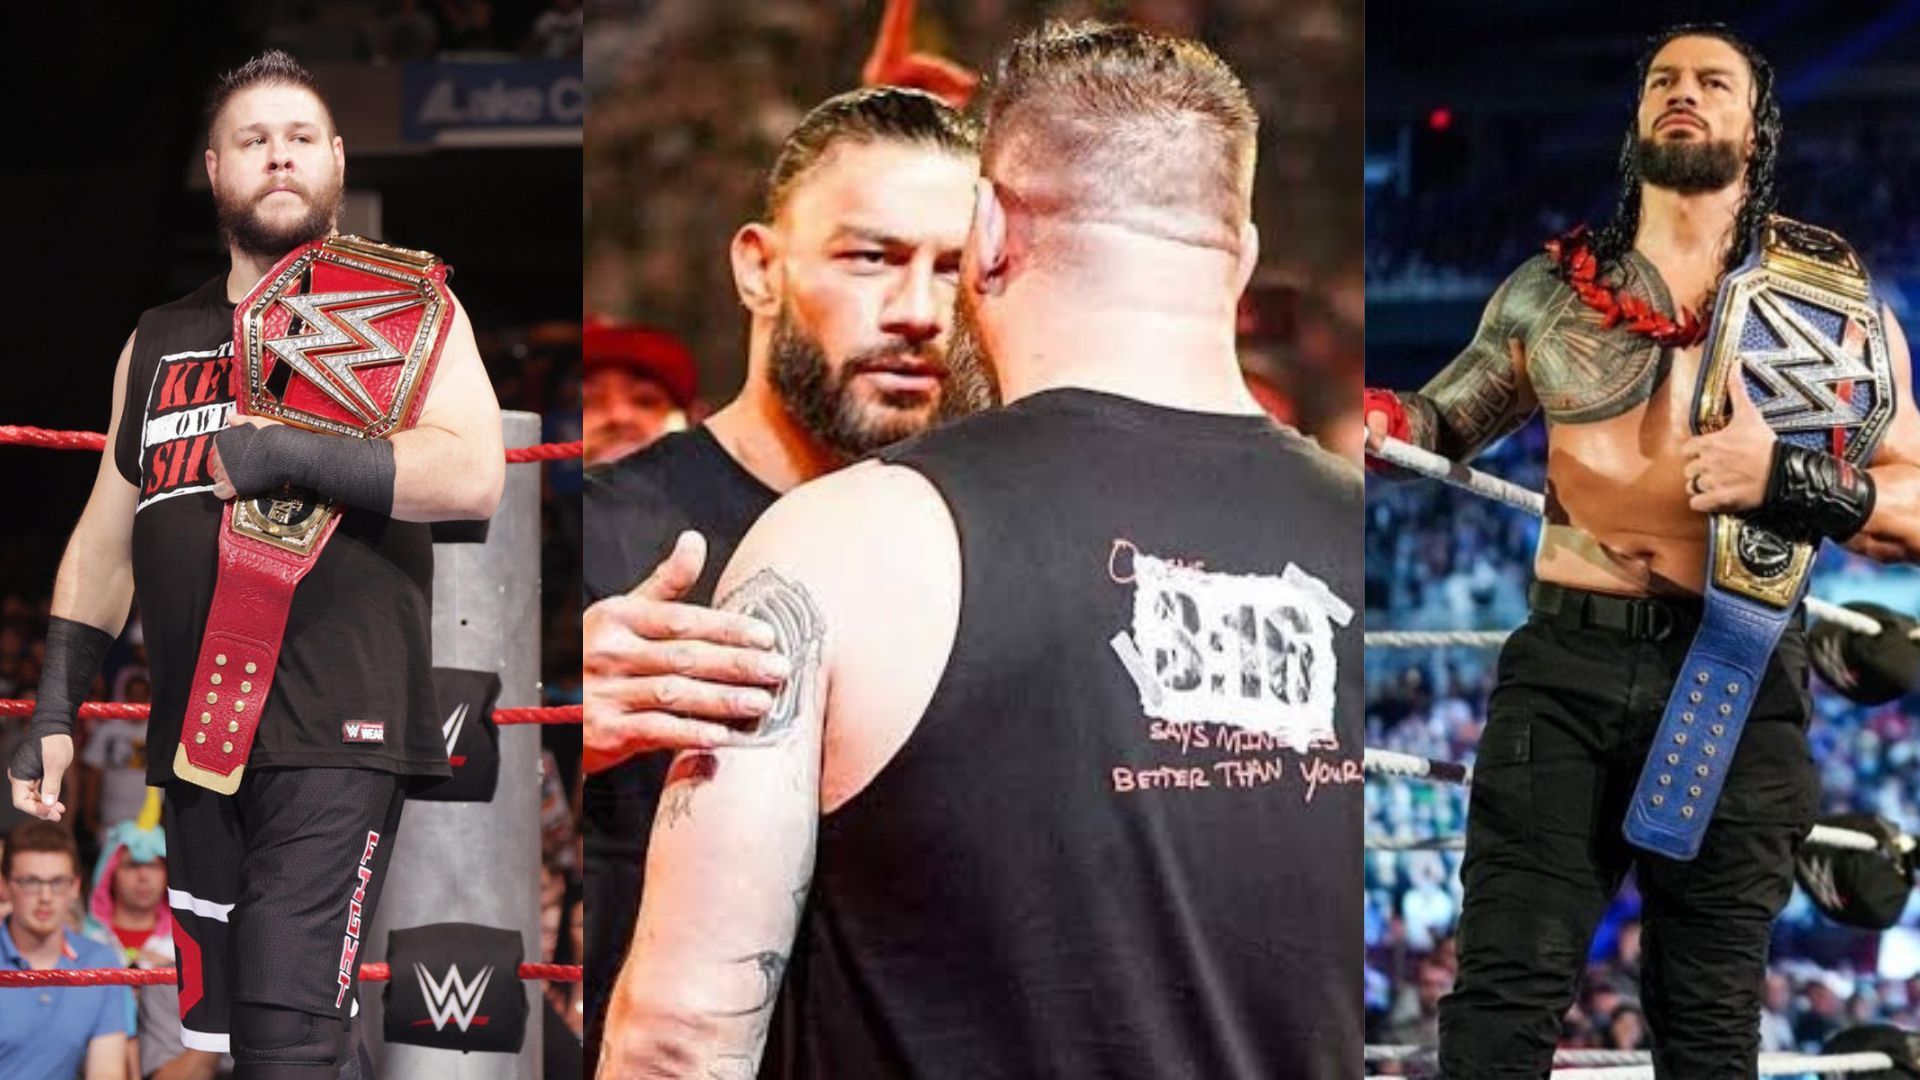 Kevin Owens and Roman Reigns are no strangers to each other